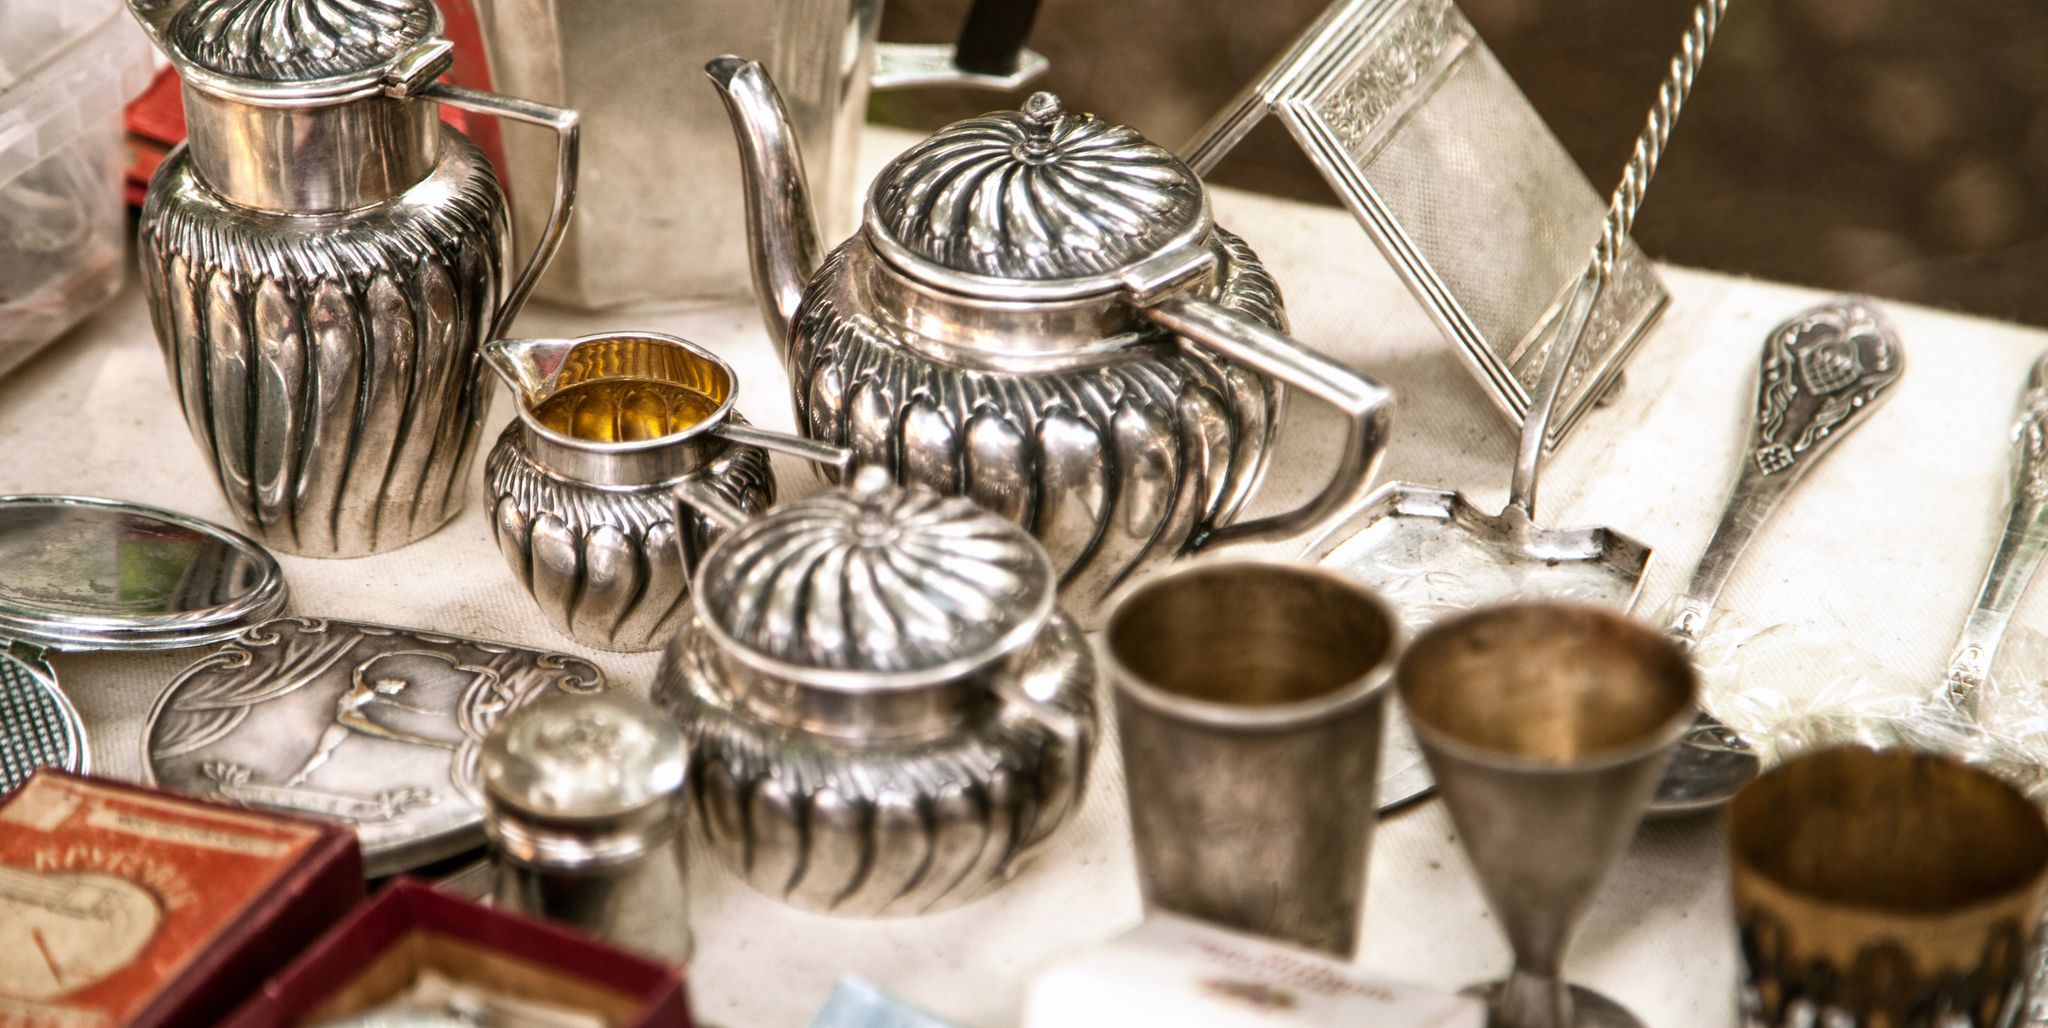 How to Clean Your Silver the Right Way, According to an Expert